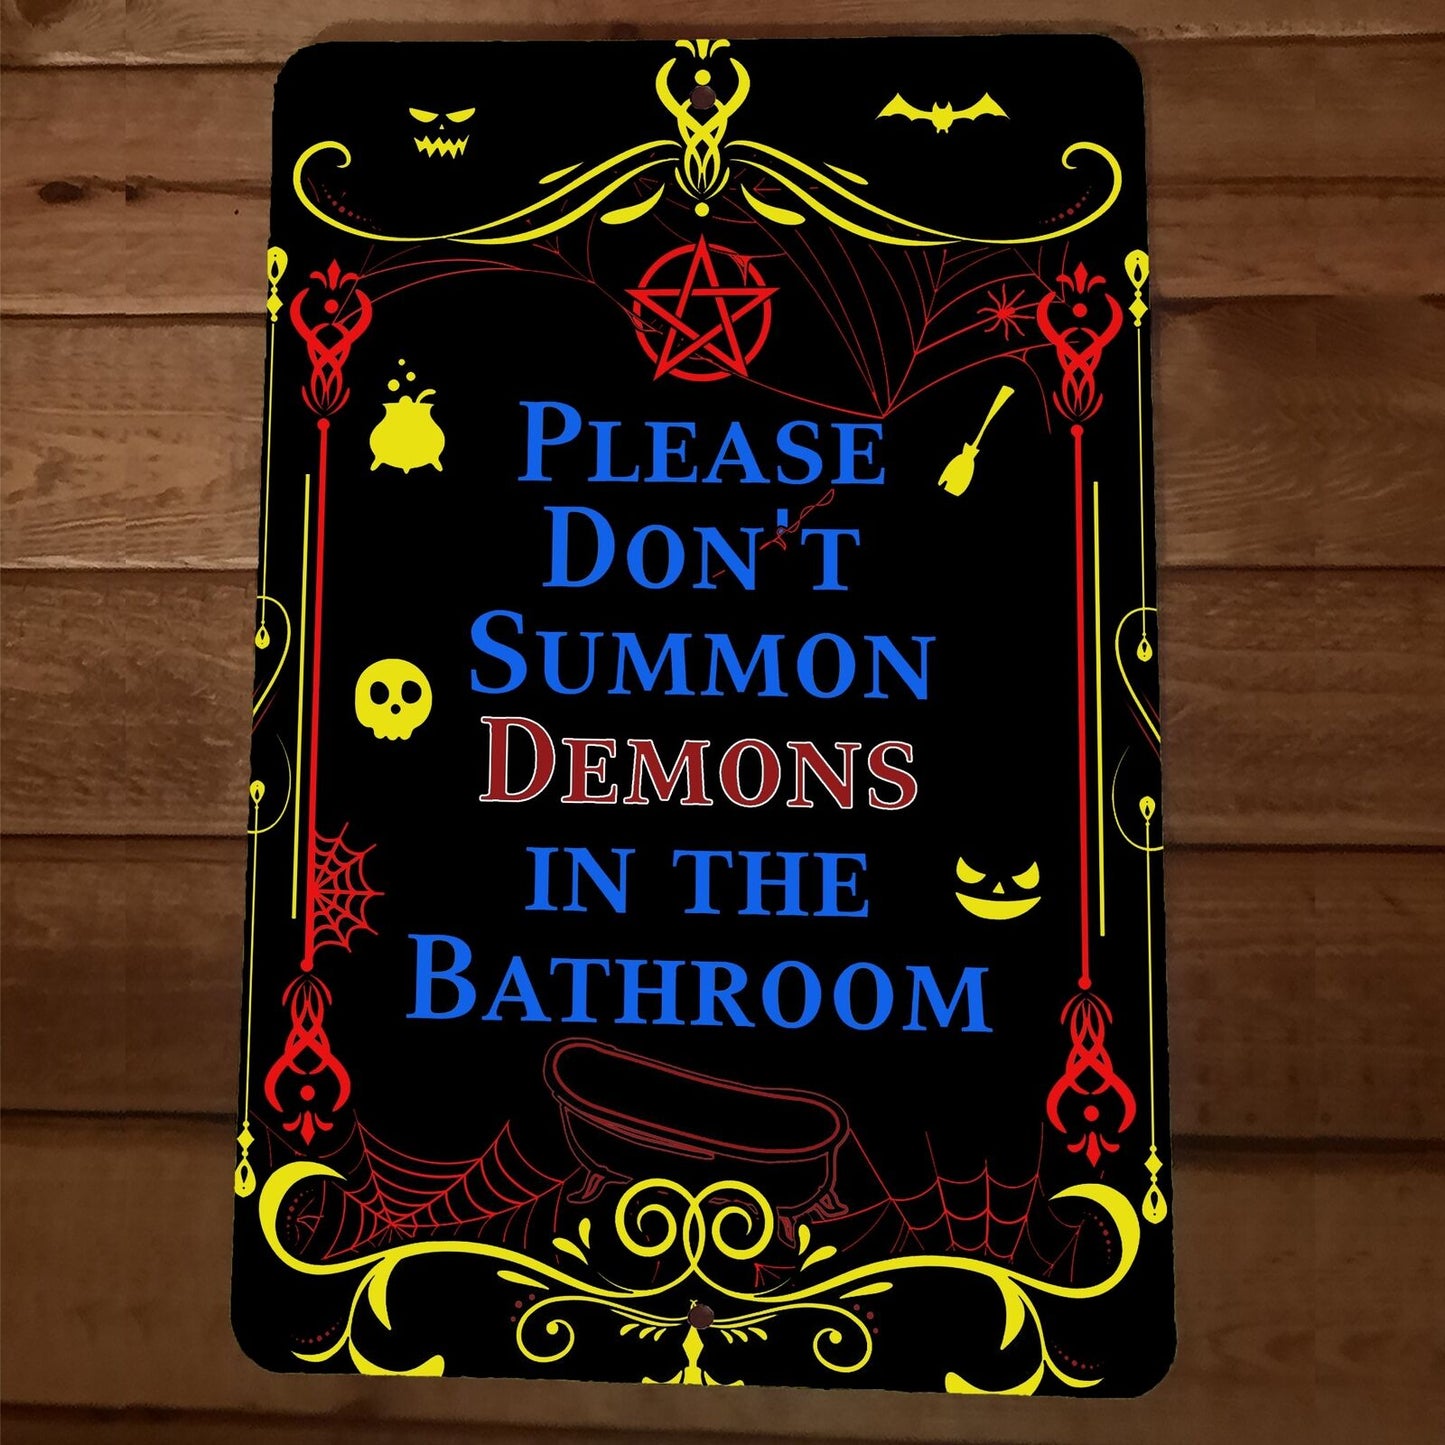 Please Don't Summon Demons in the Bathroom 8x12 Metal Wall Sign Poster